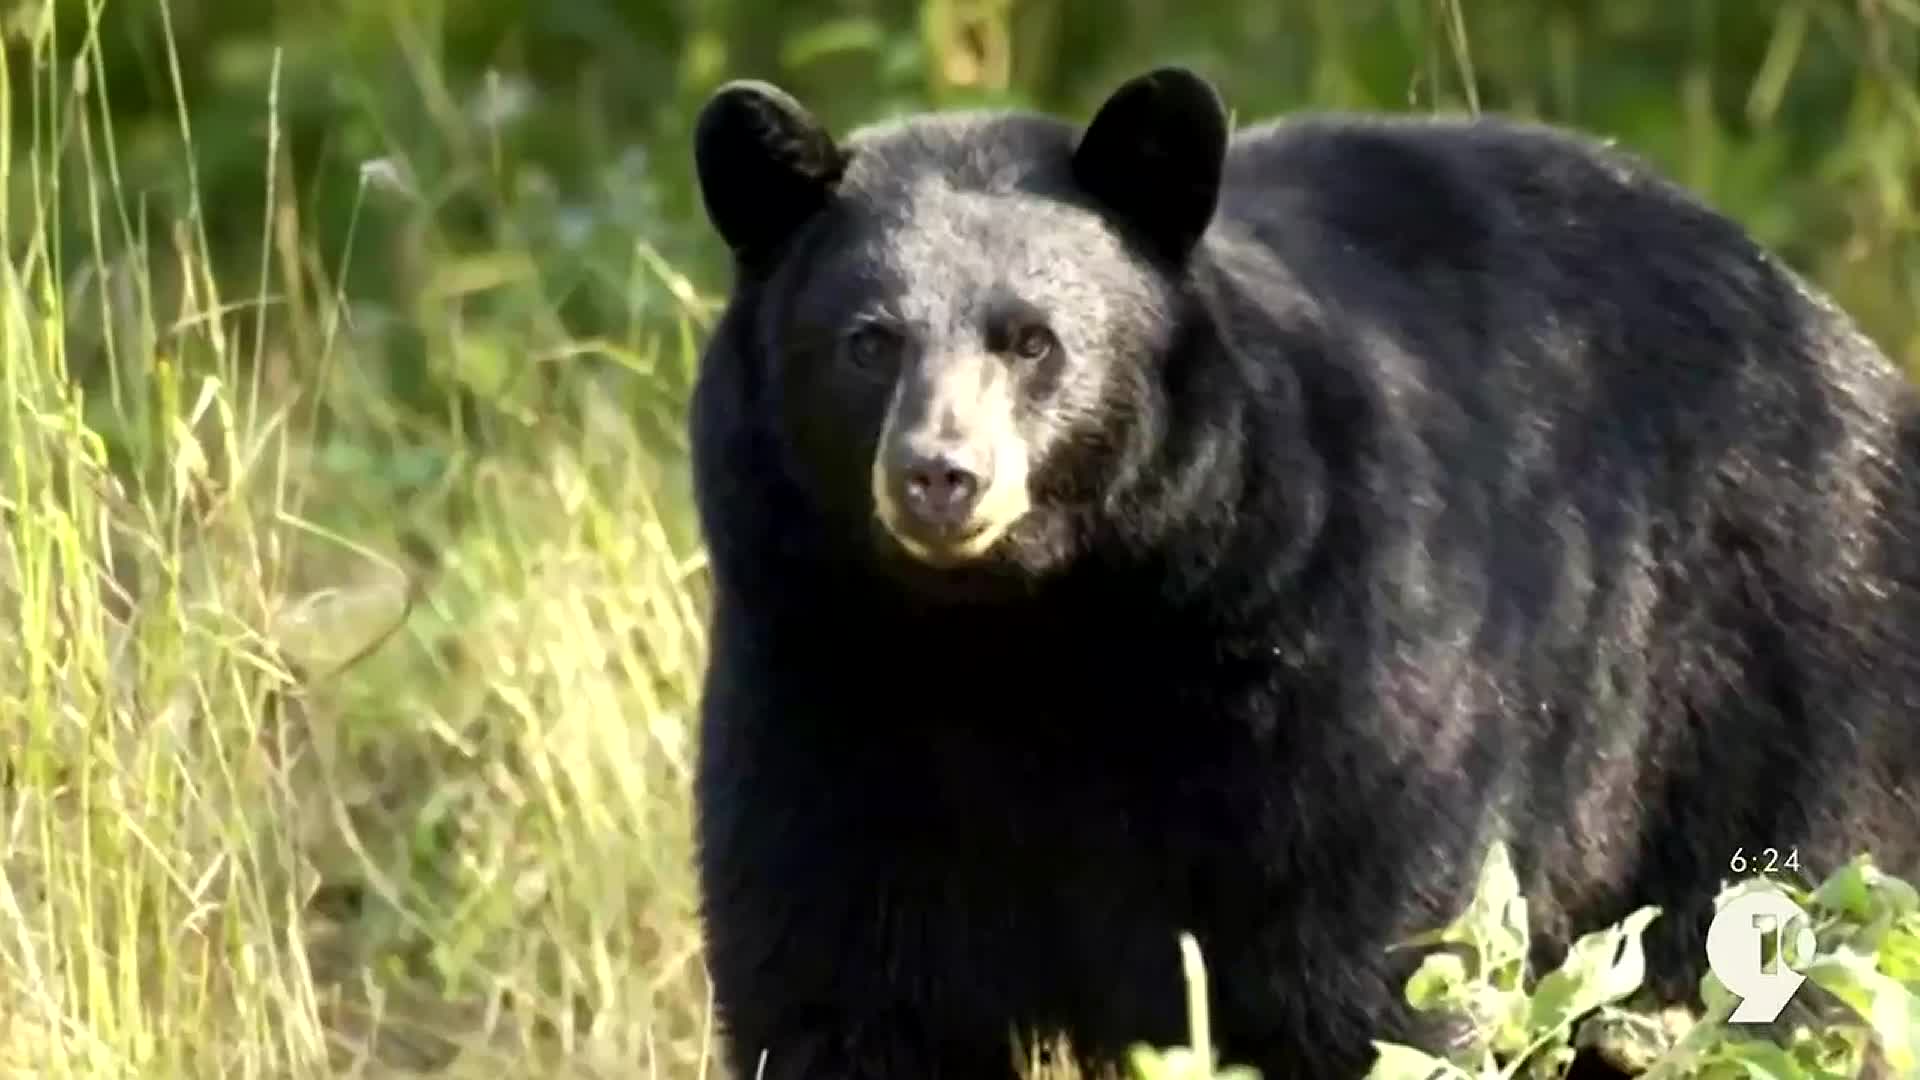 Hook & Hunting: What to know before bear baiting season